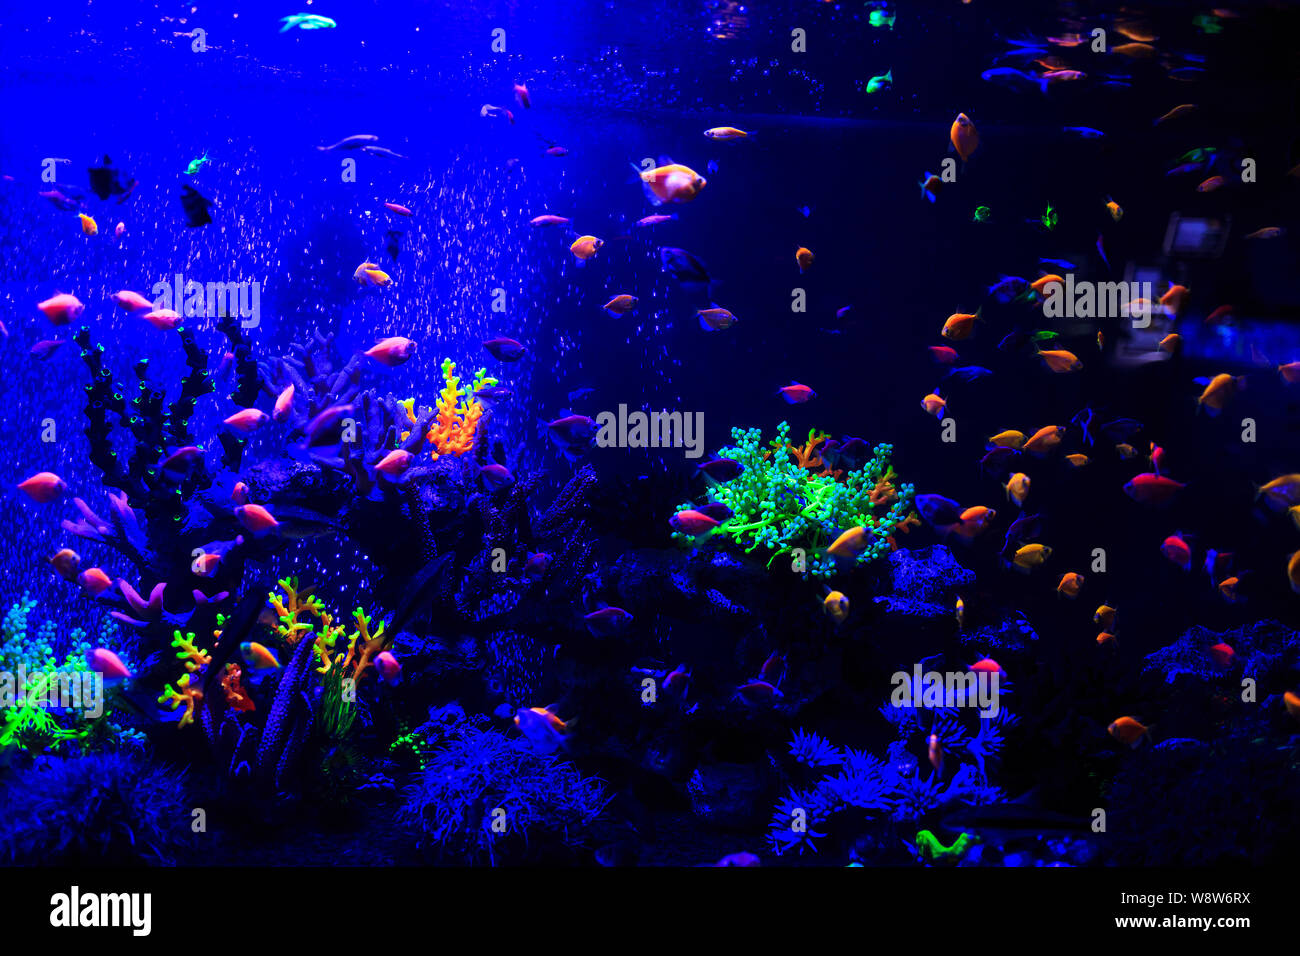 Beautiful group of sea fishes captured on camera under the water on dark blue natural backdrop of the ocean or aquarium. Underwater colorful fishes Stock Photo